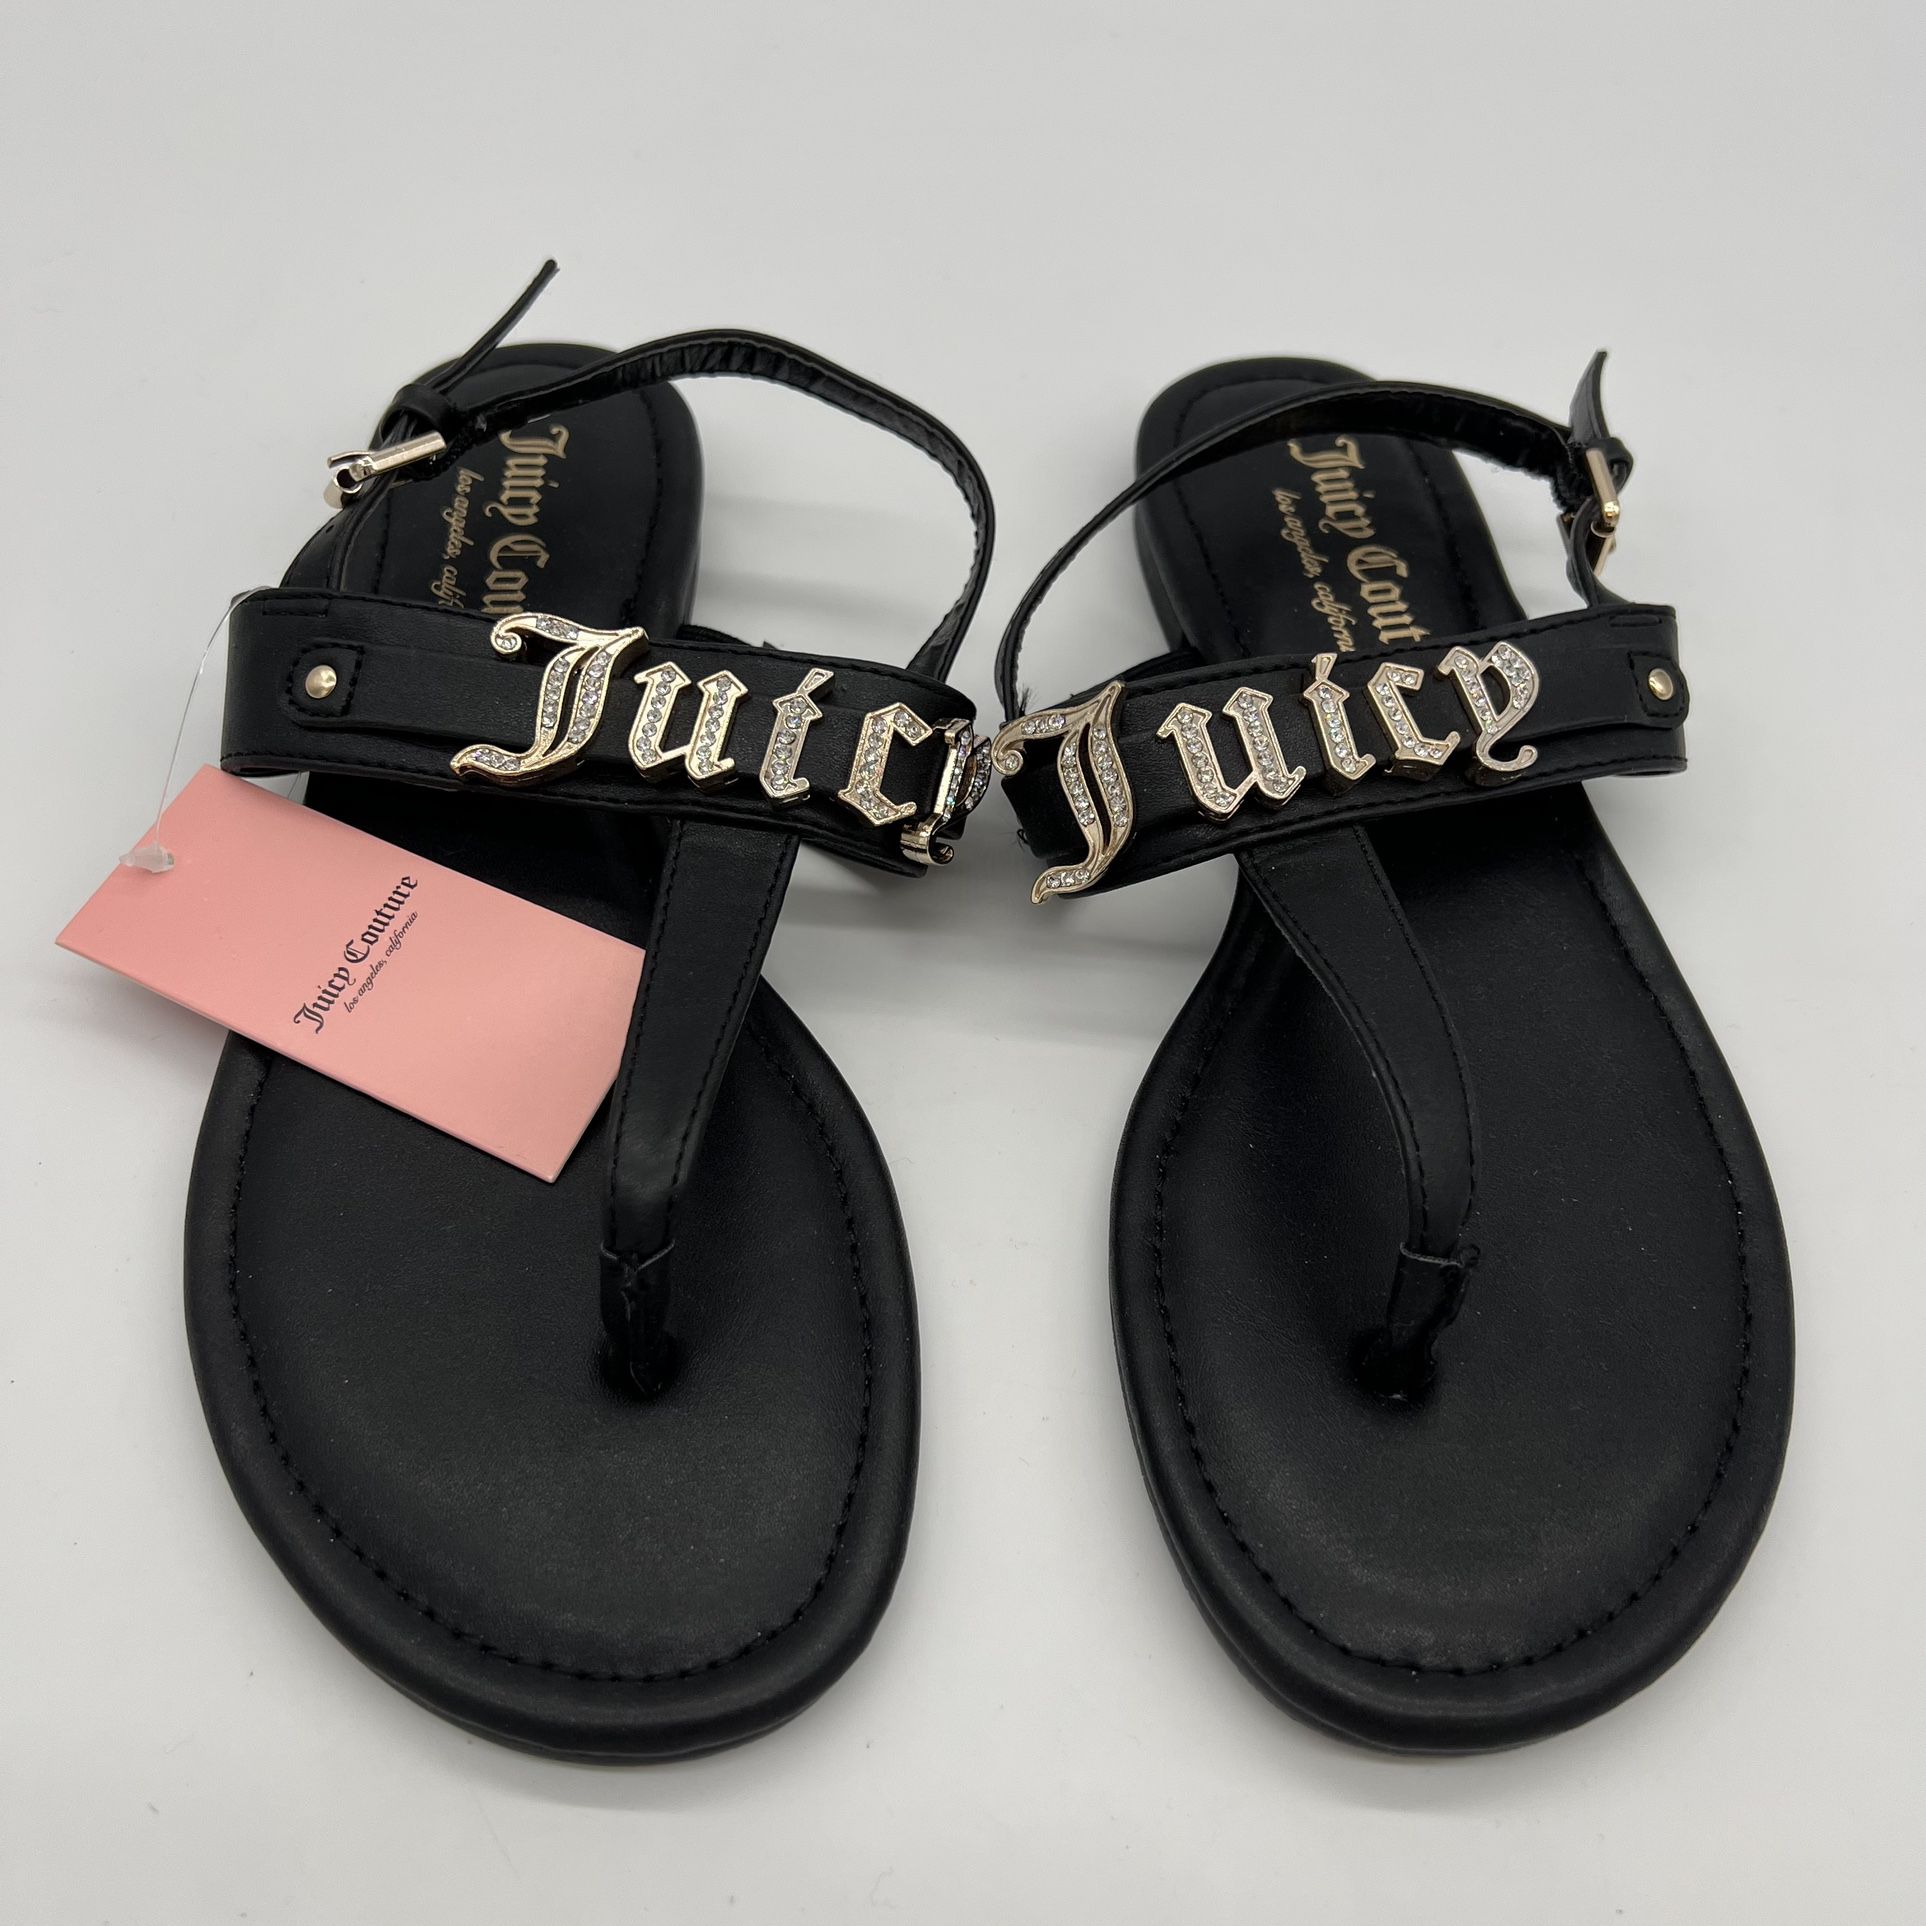 NWT Juicy Couture Diamond Strappy Sandals Womens Black Gold Bling